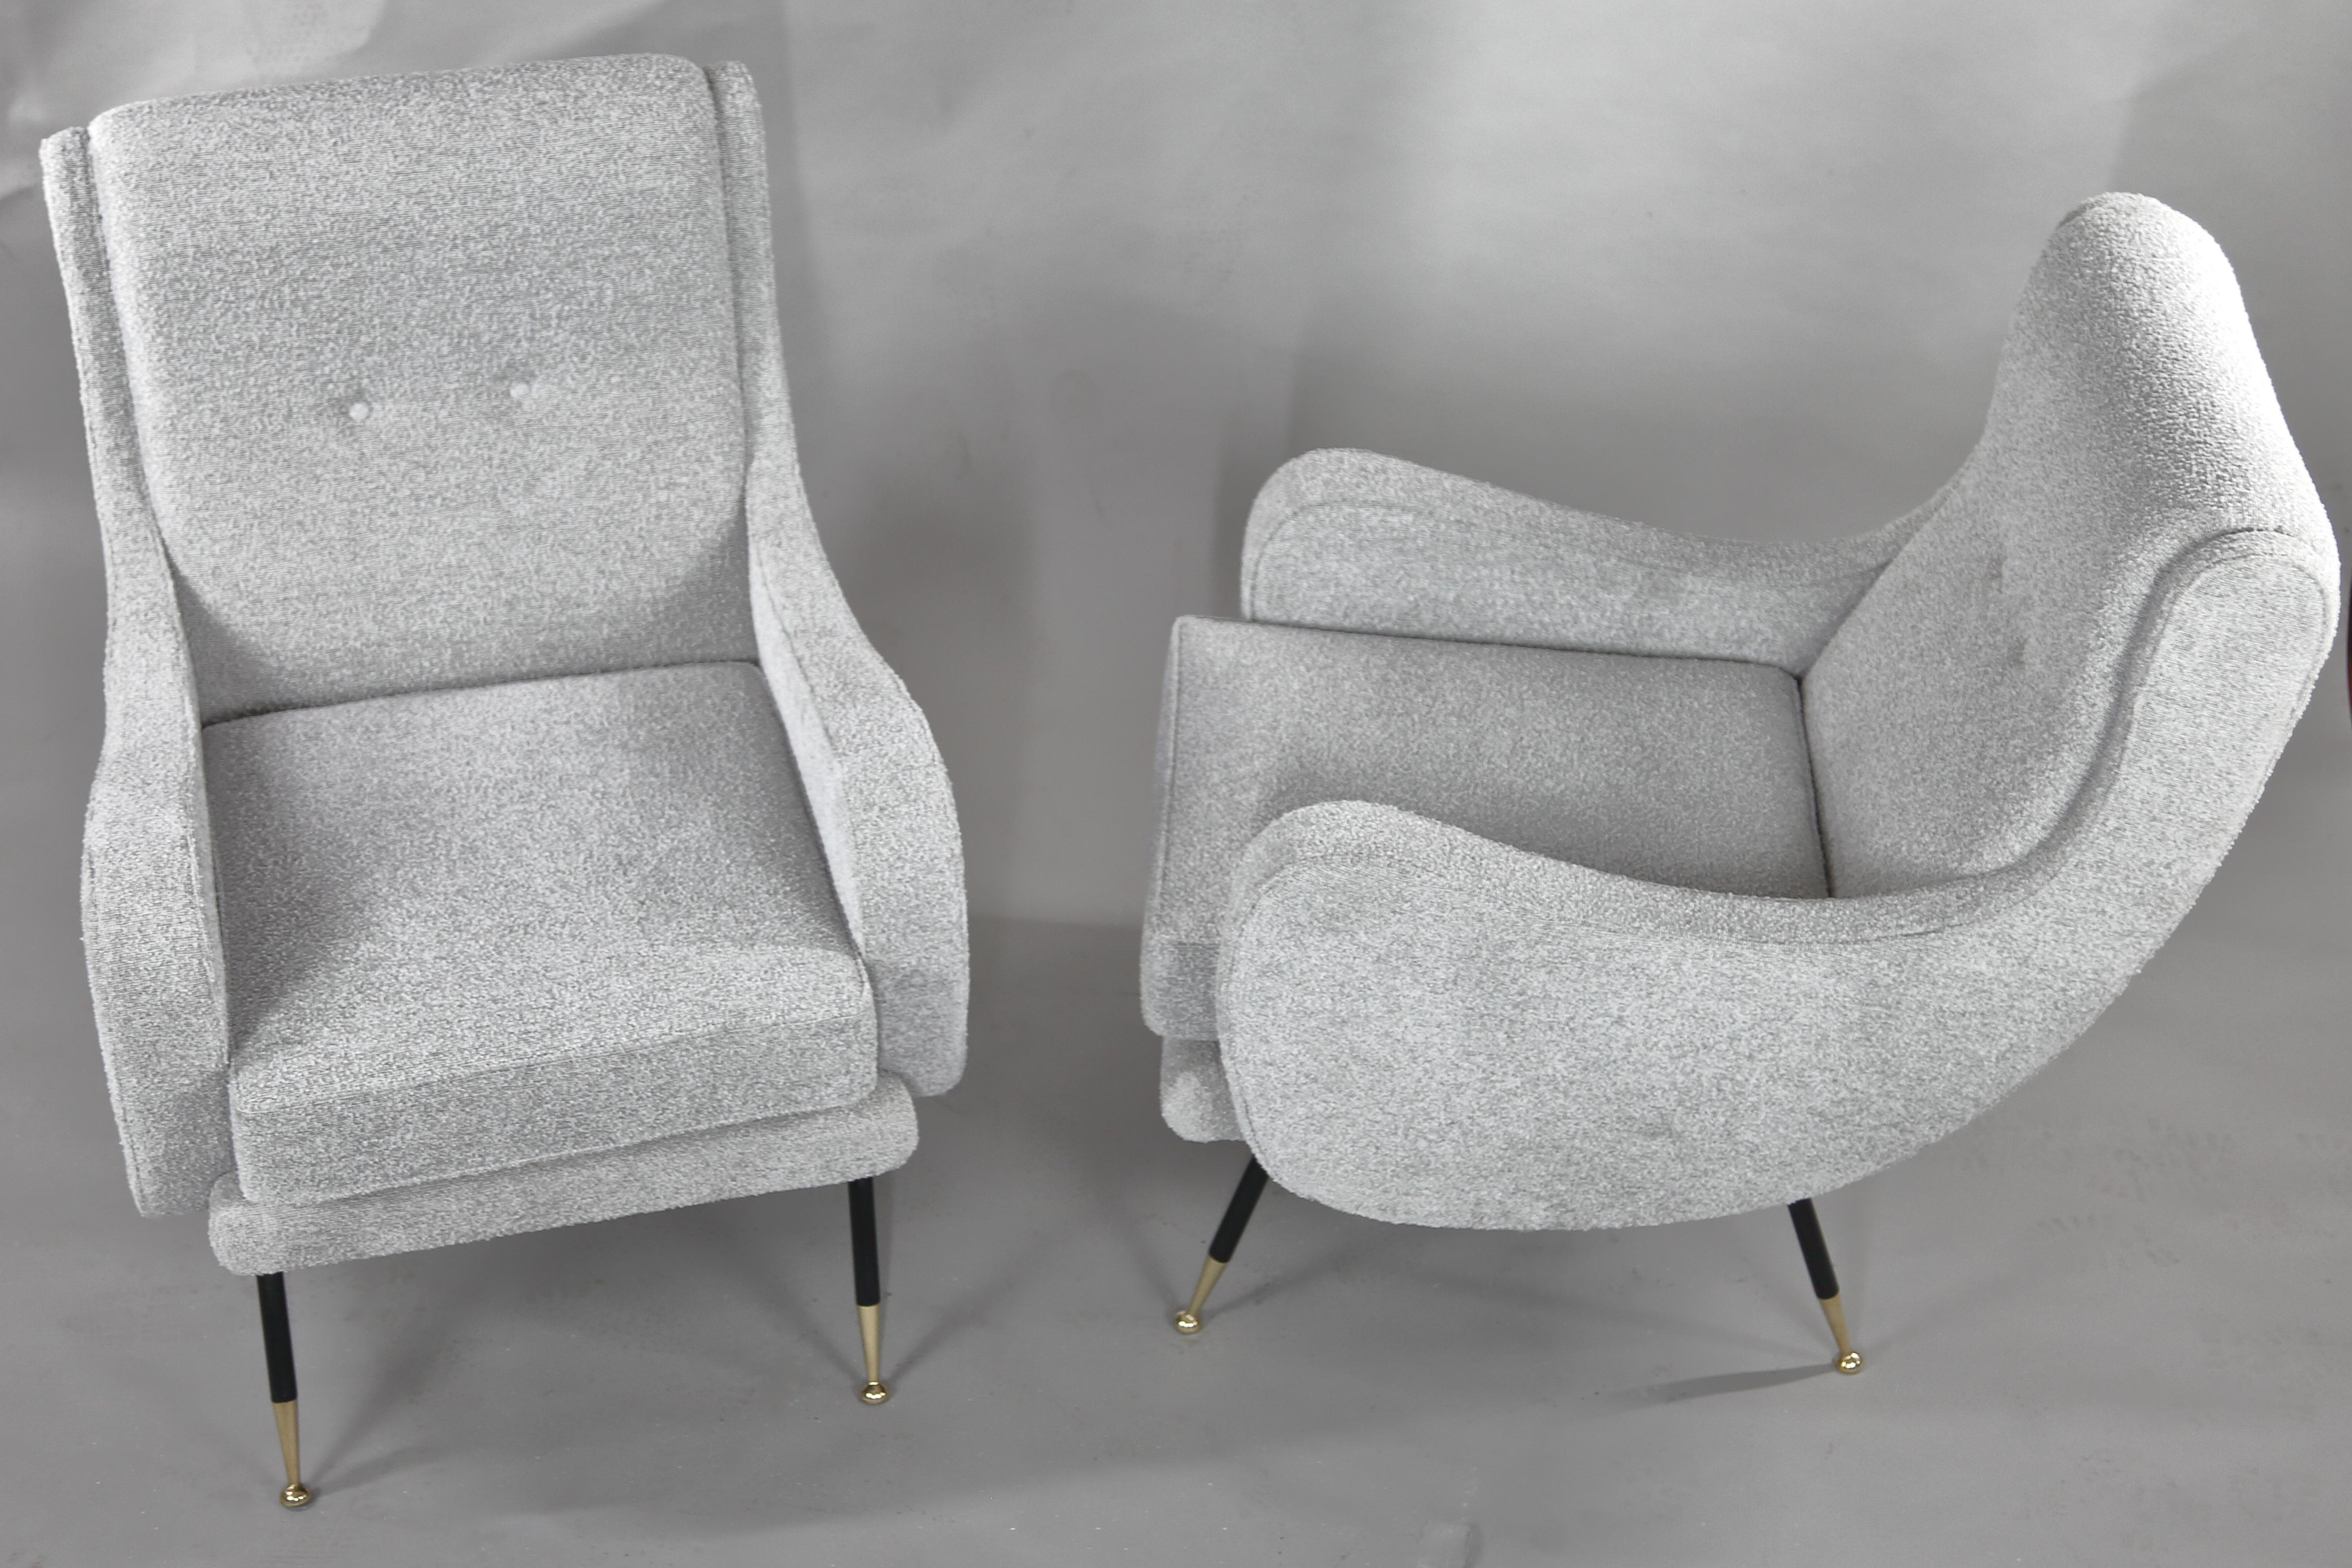 Pair of mid-century armchairs, Italy 1970s, entirely restored and reupholstered with a boucle‘ by Romo (Gobi)